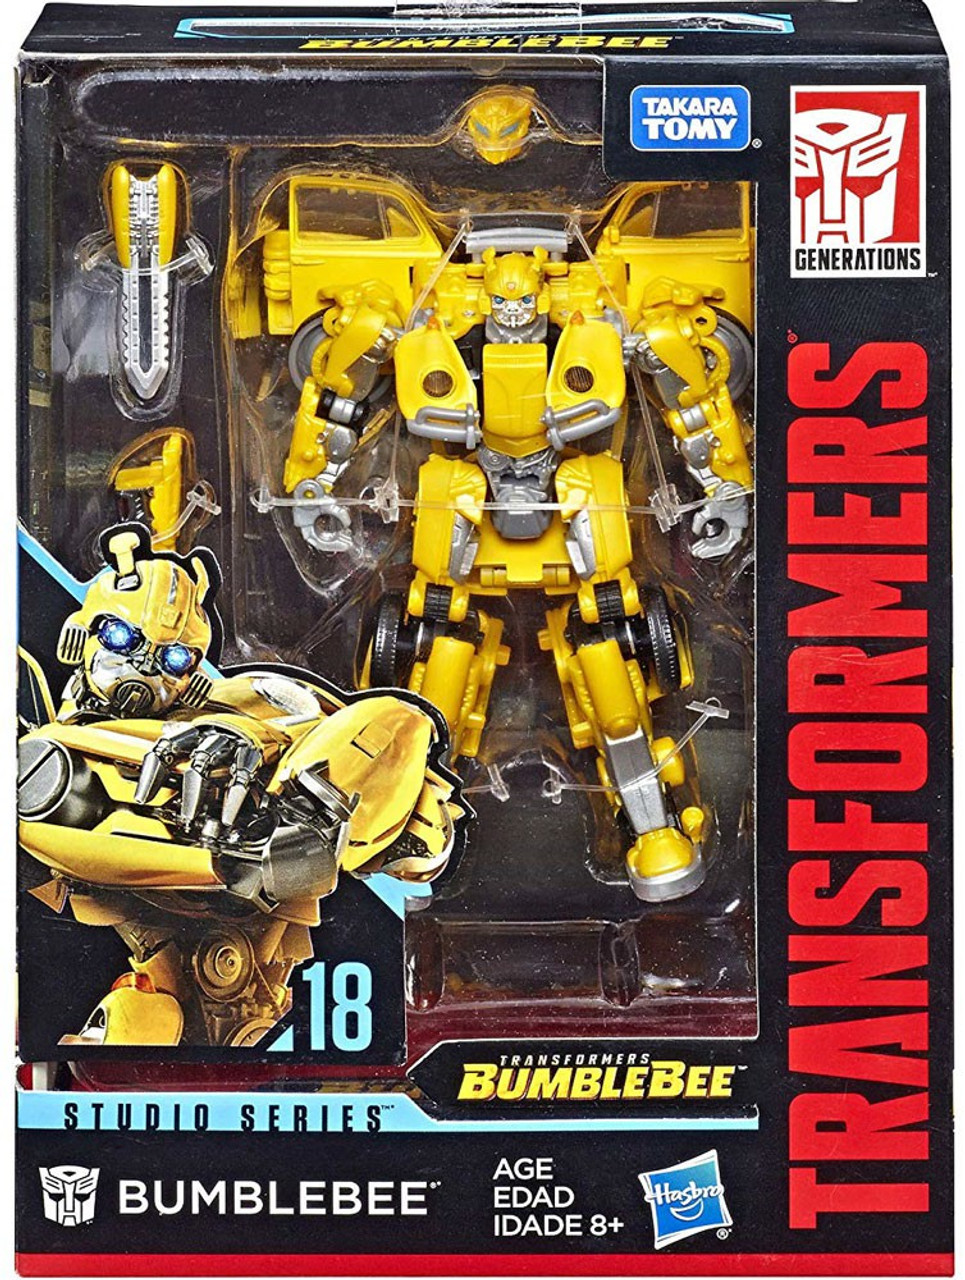 new bumblebee transformer toy